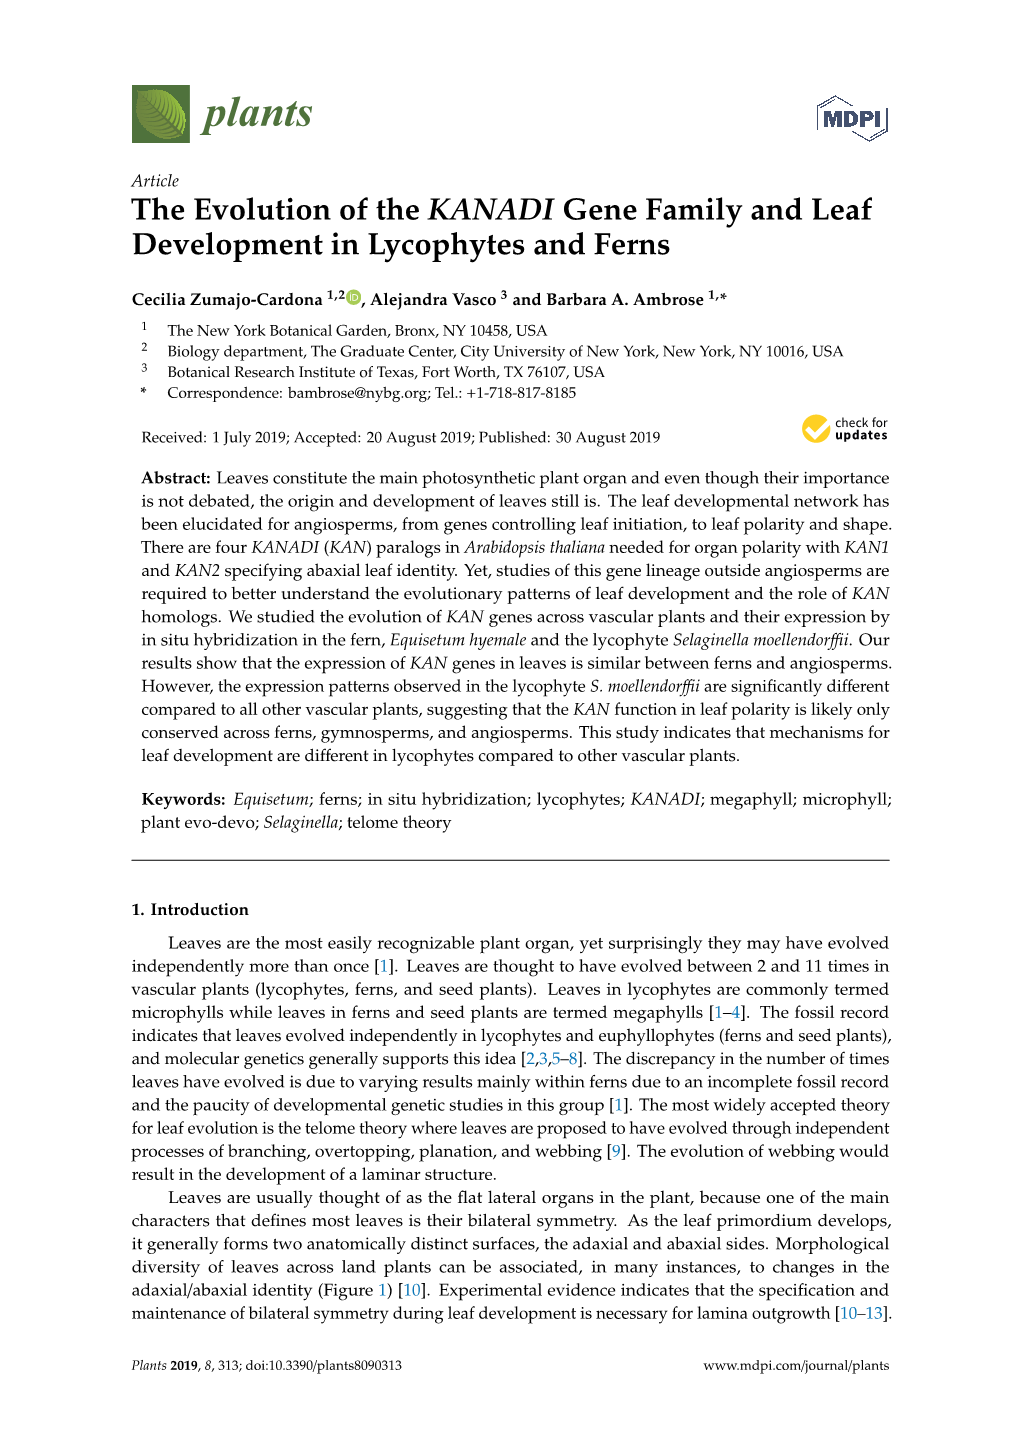 The Evolution of the KANADI Gene Family and Leaf Development in Lycophytes and Ferns